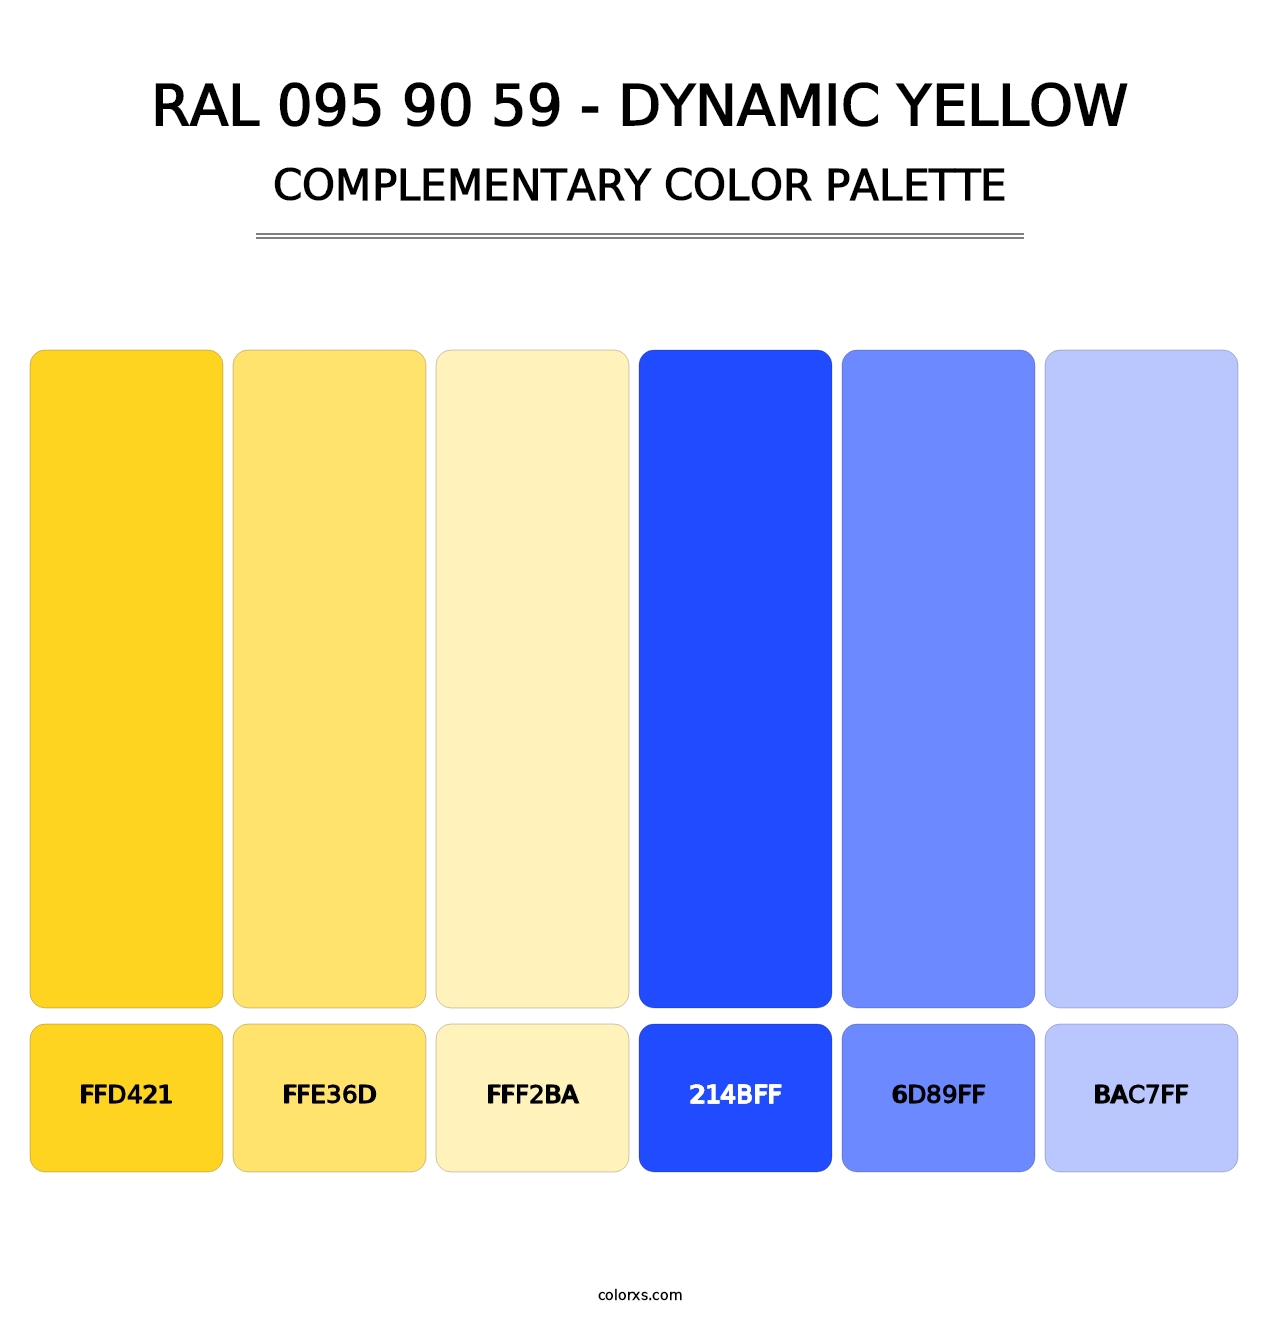 RAL 095 90 59 - Dynamic Yellow - Complementary Color Palette